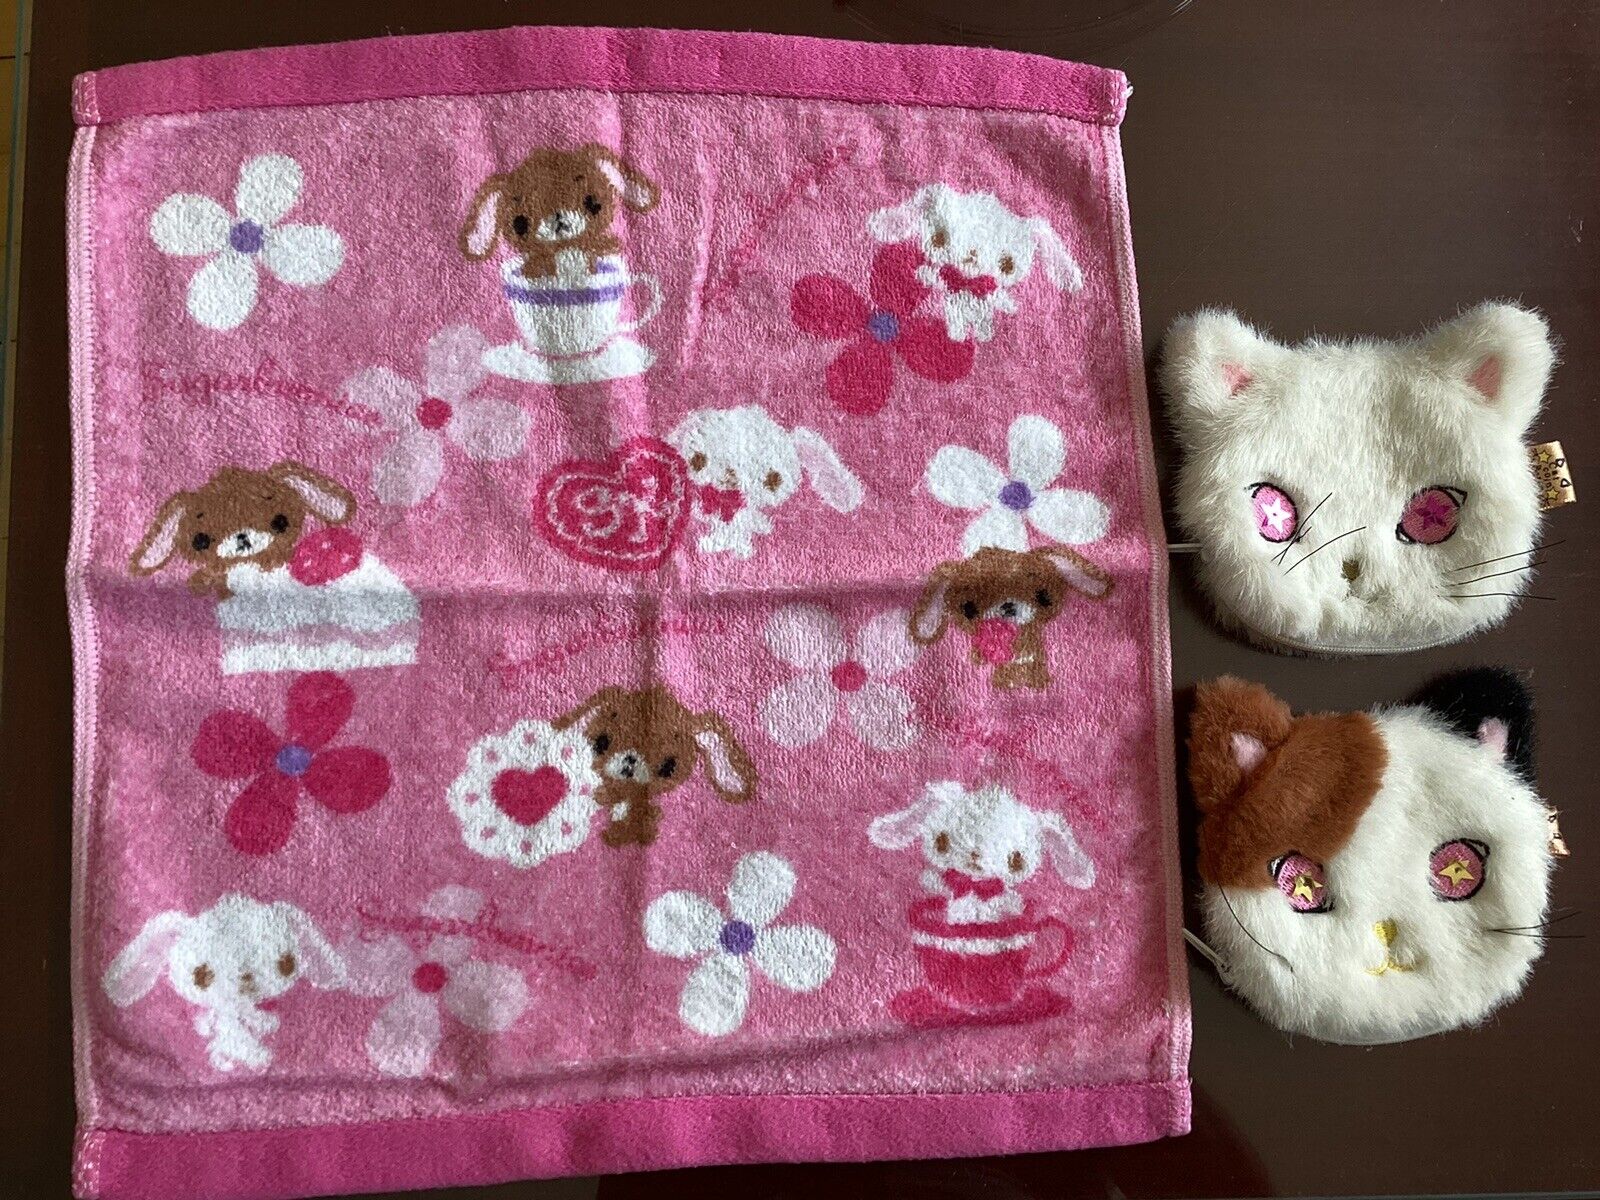 SANRIO Sugarbunnies Hand Towels & two Cat Furry Jipped Purses